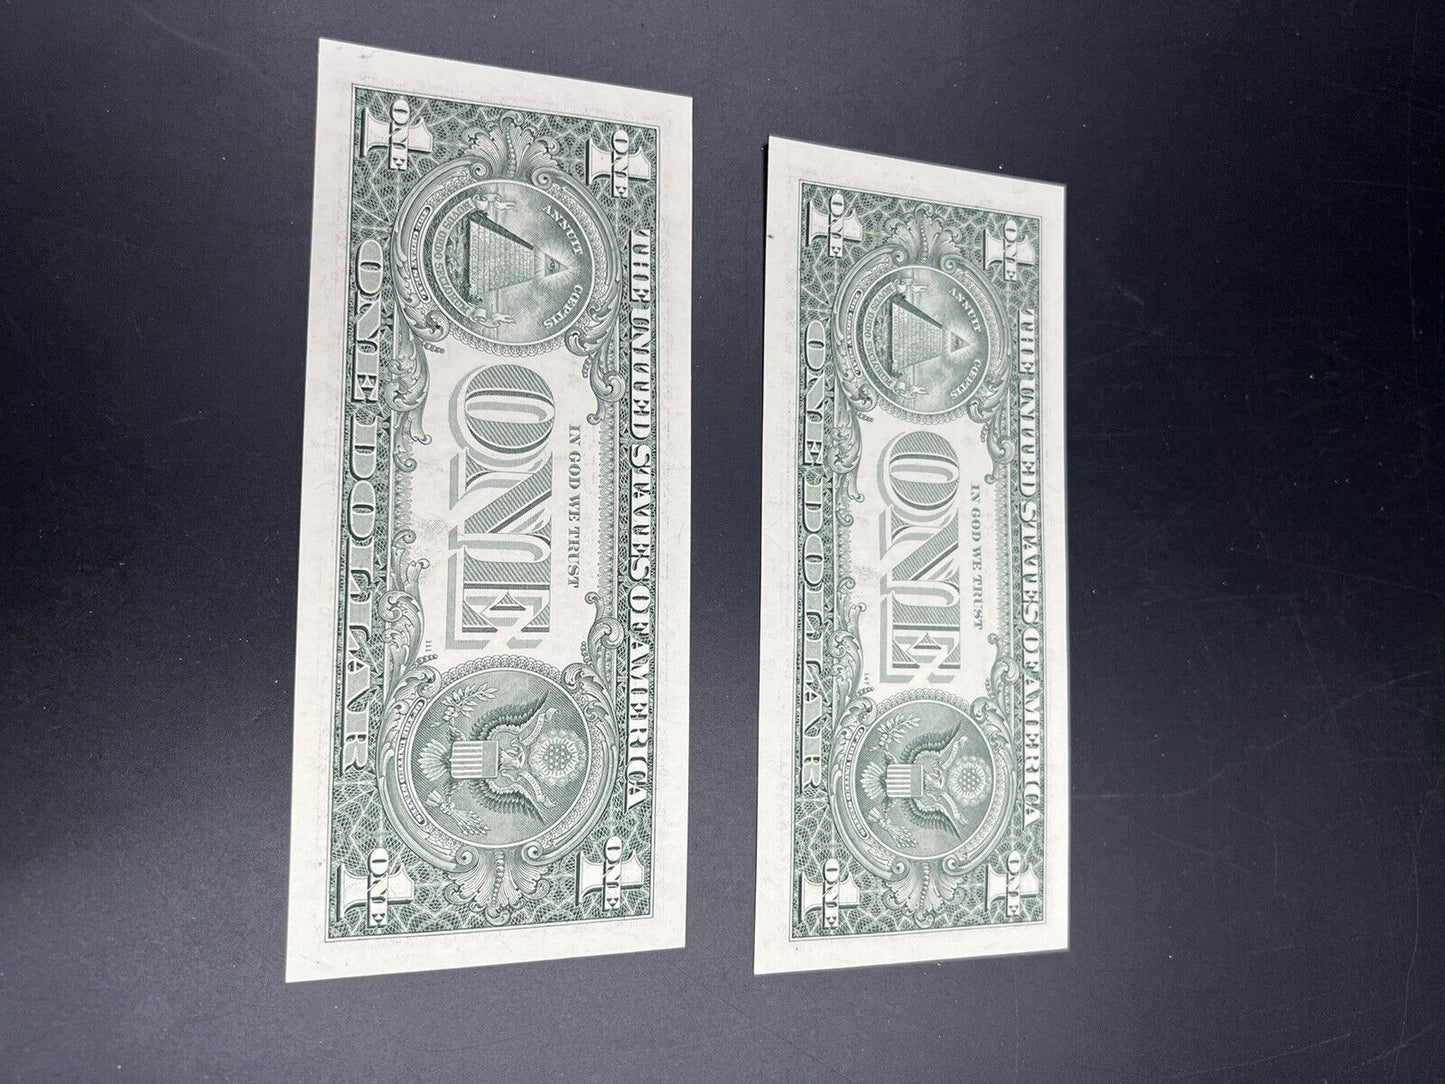 2 Consecutive 2006 $1 FRN SIXTUPLE REPEATER Serial Numbers 44444401-3 CH UNC